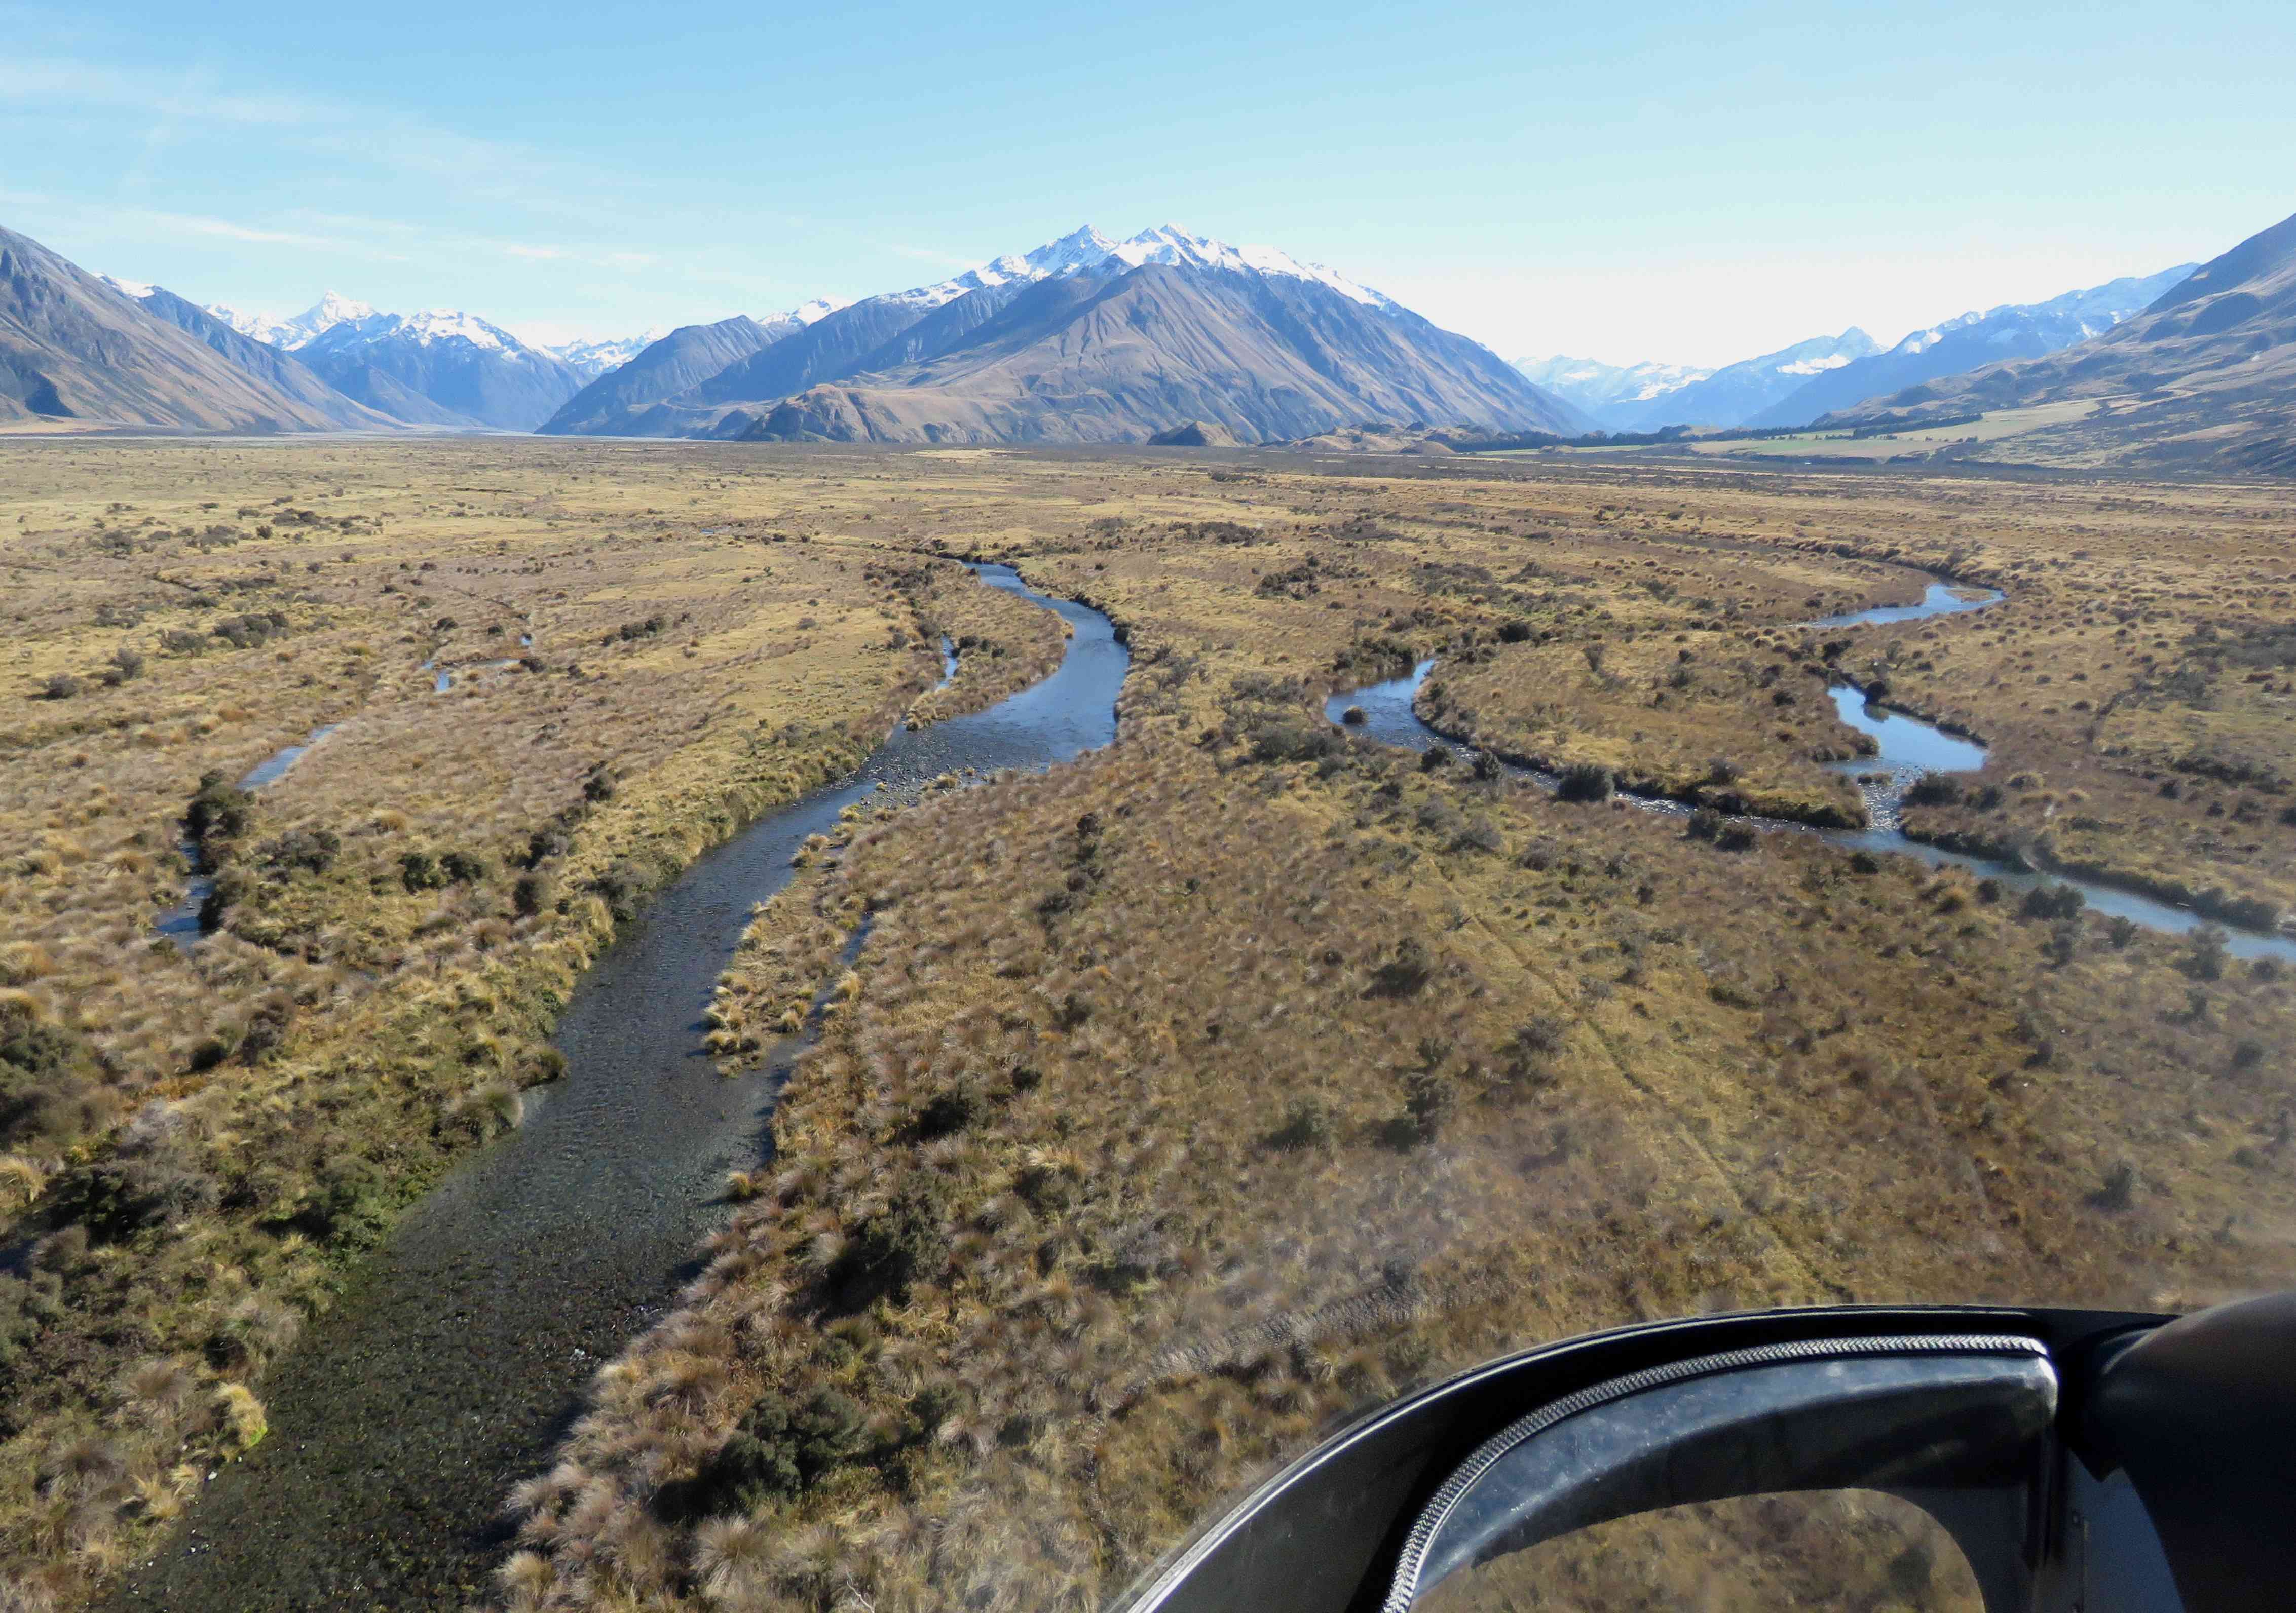 WFR1819.61The view while counting live spawning salmon in Rangitata River headwaters credit R Adams